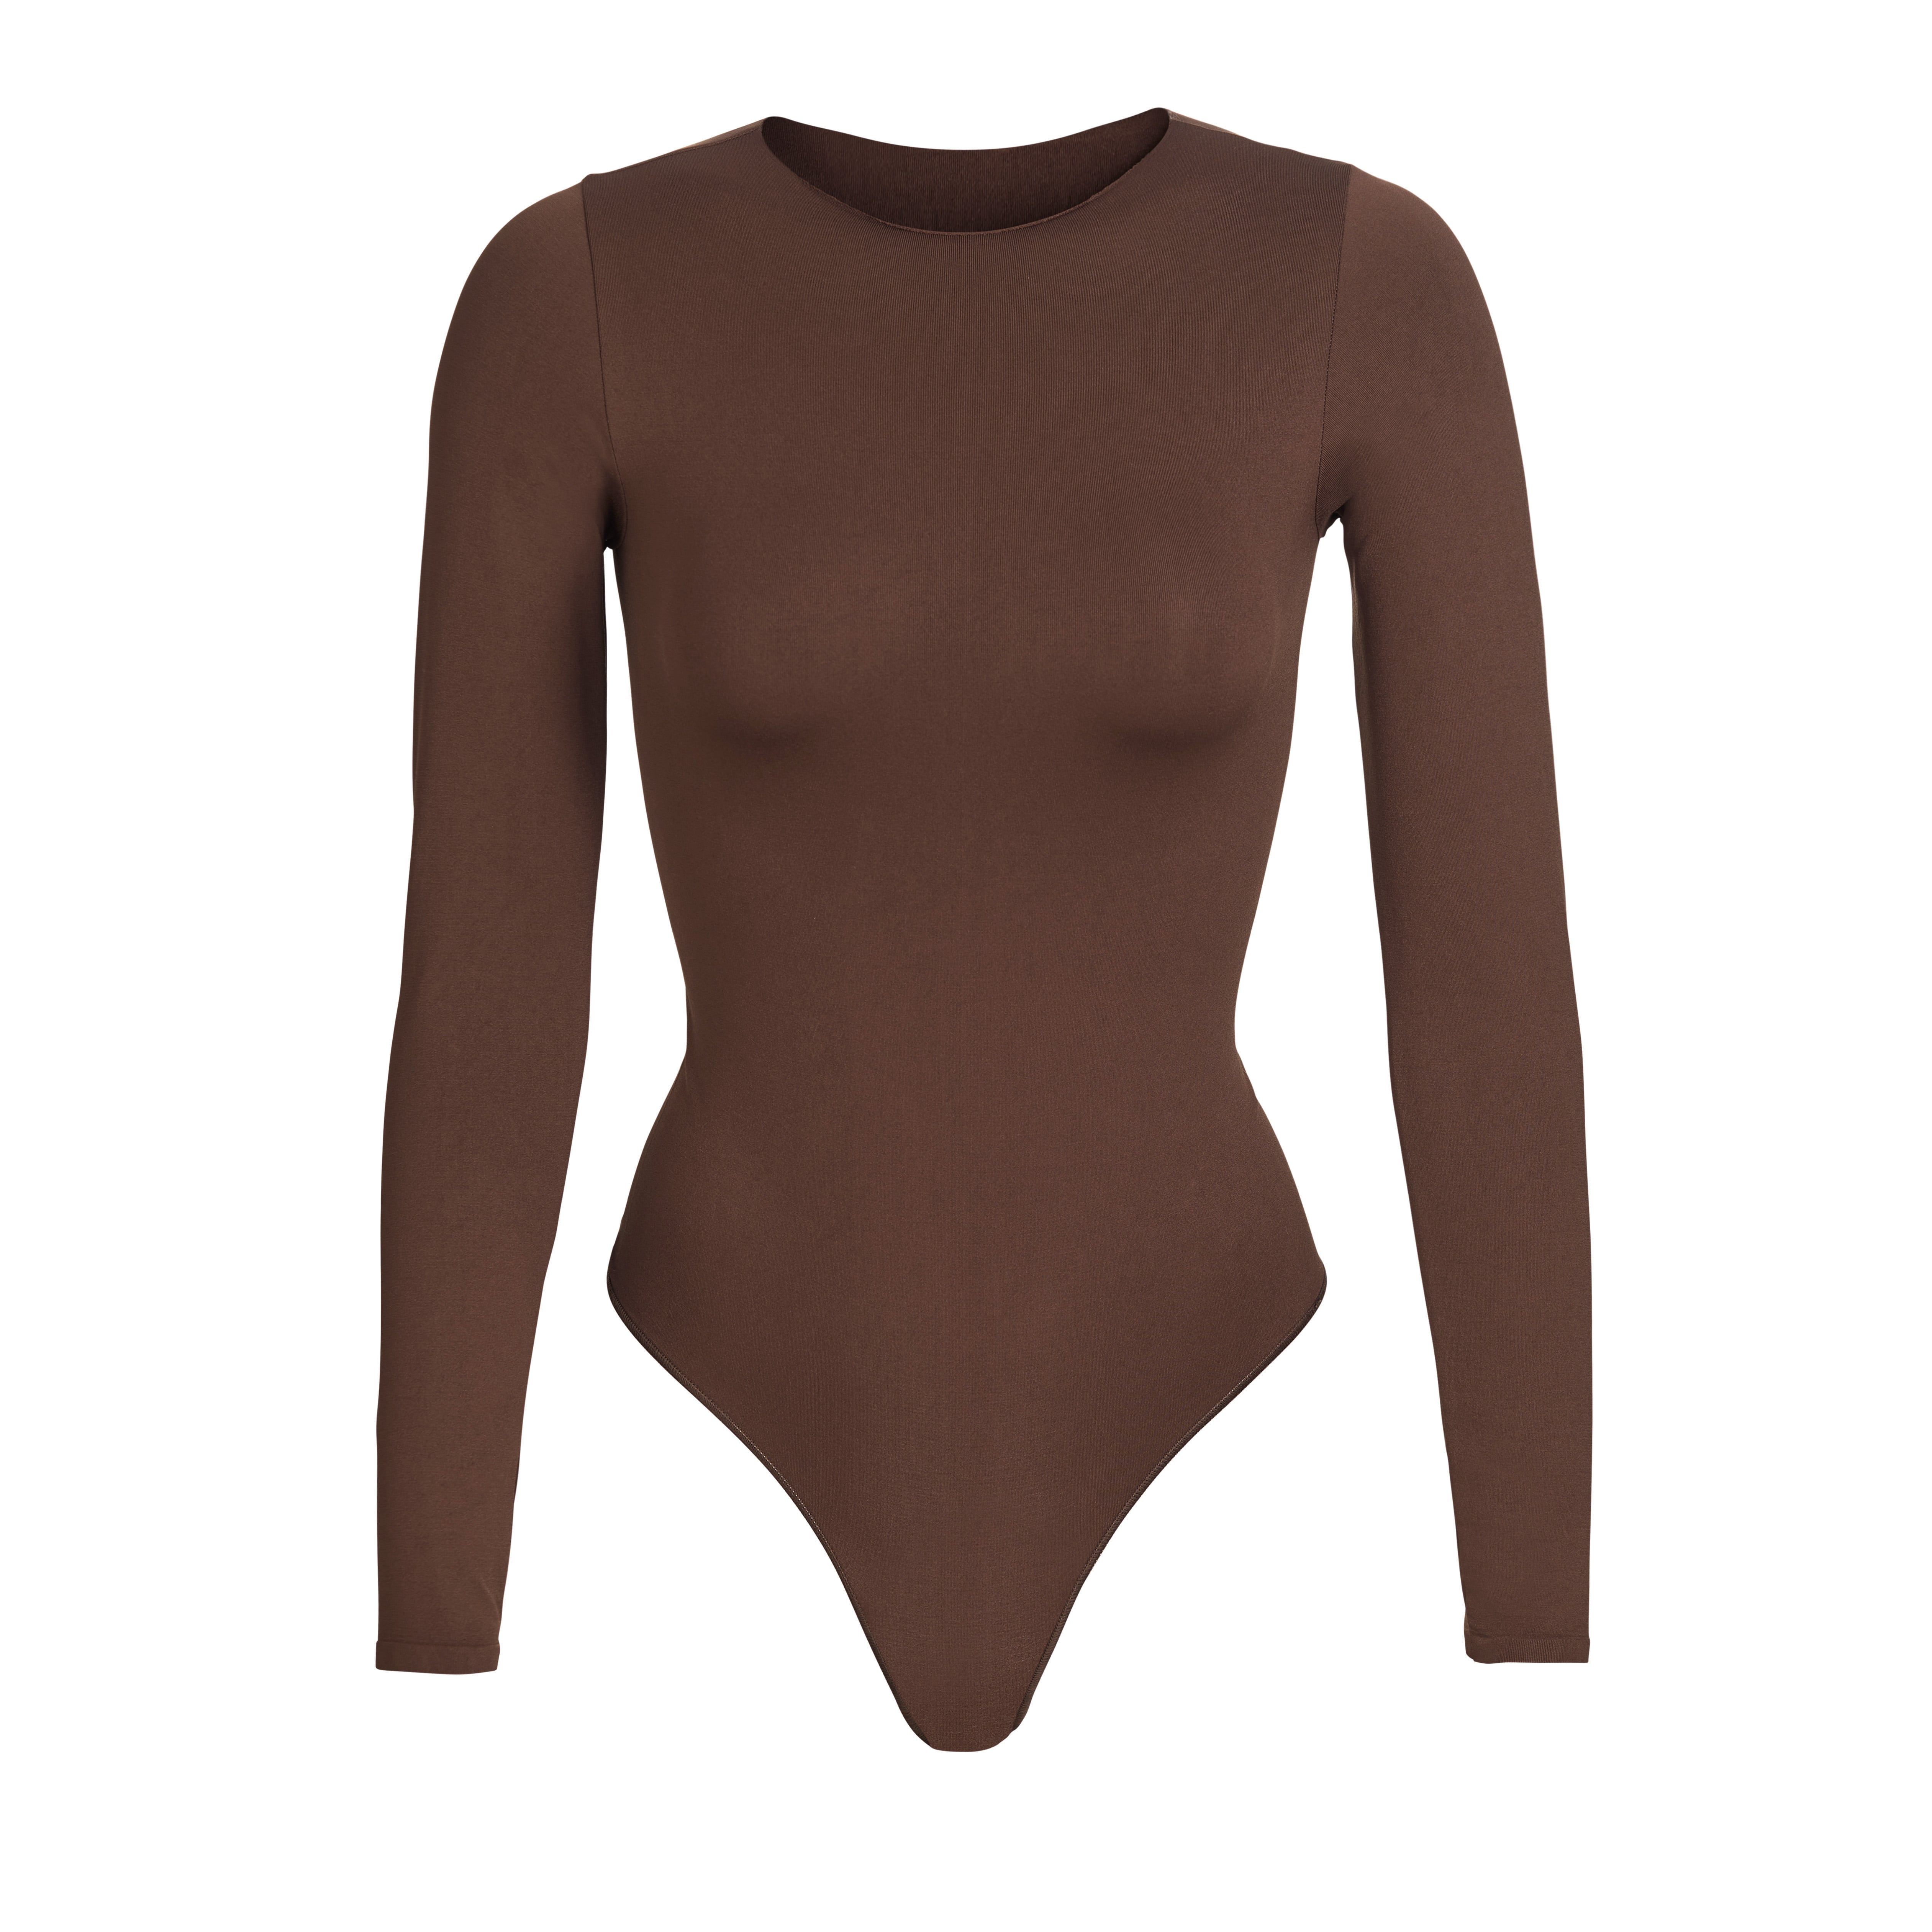 SKIMS - New Essential Bodysuit colors are here! Start the